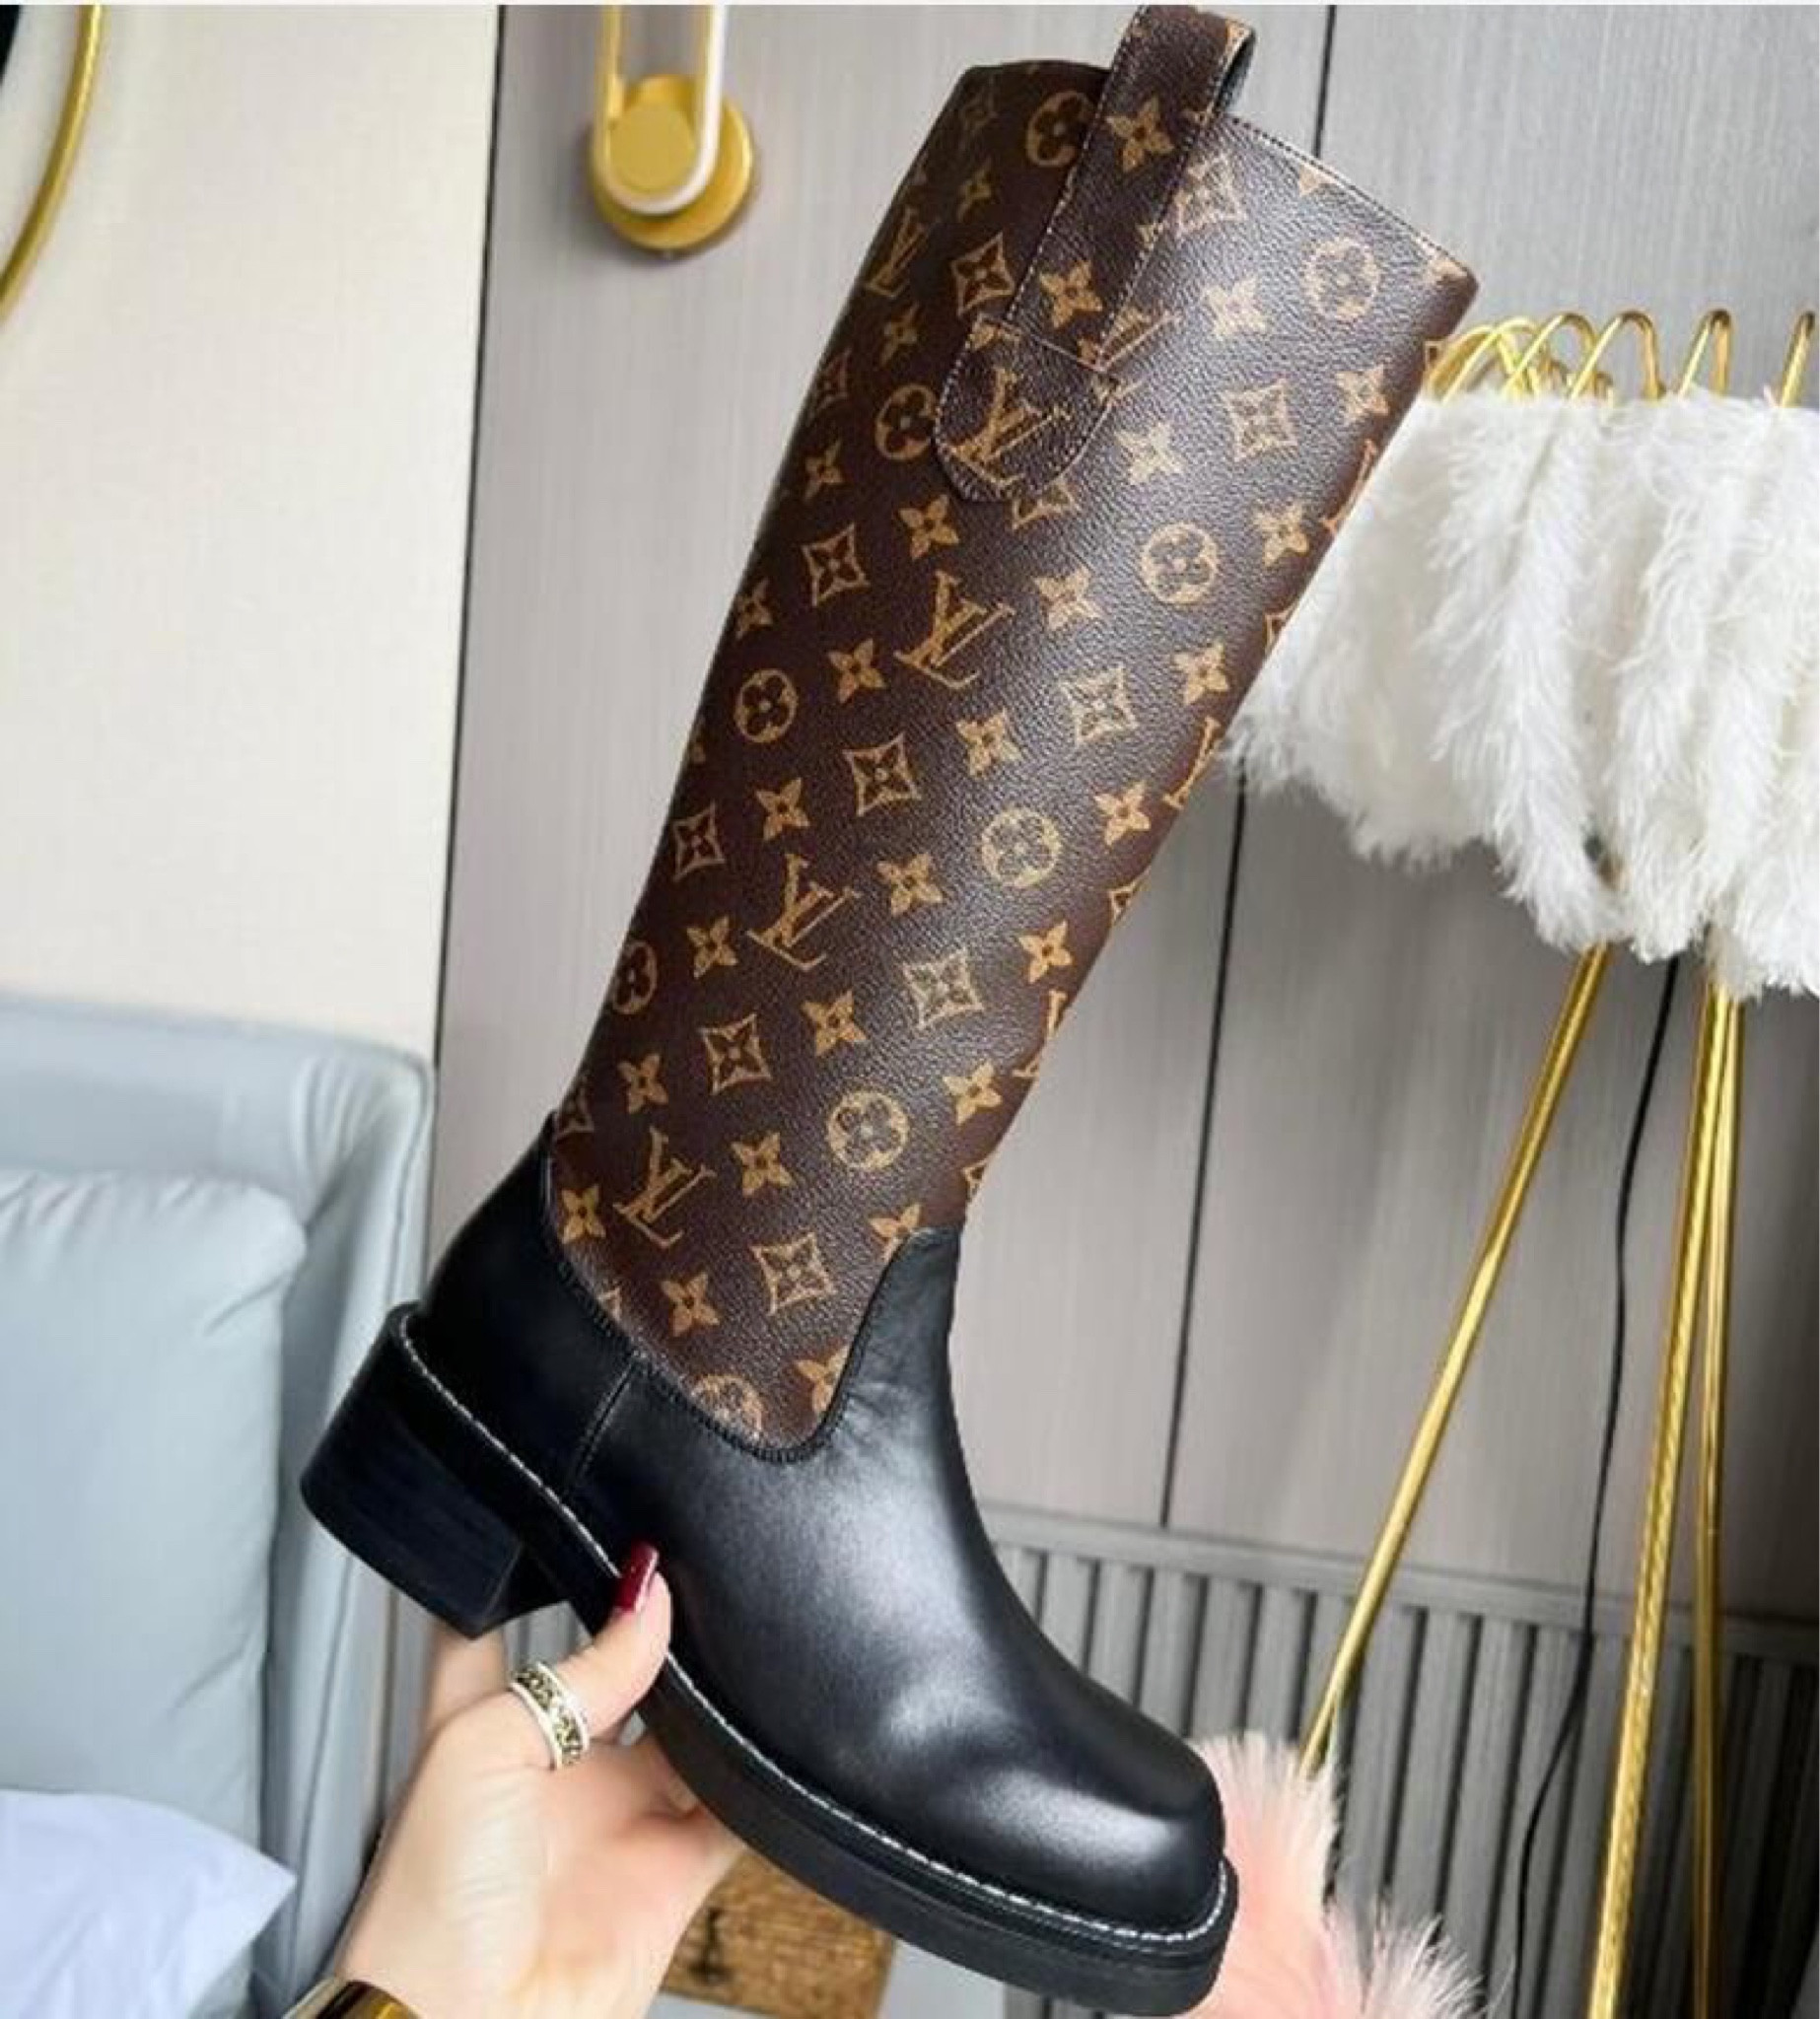 Louis Vuitton: Boots, Bags, & Sneakers — Keep it Chic